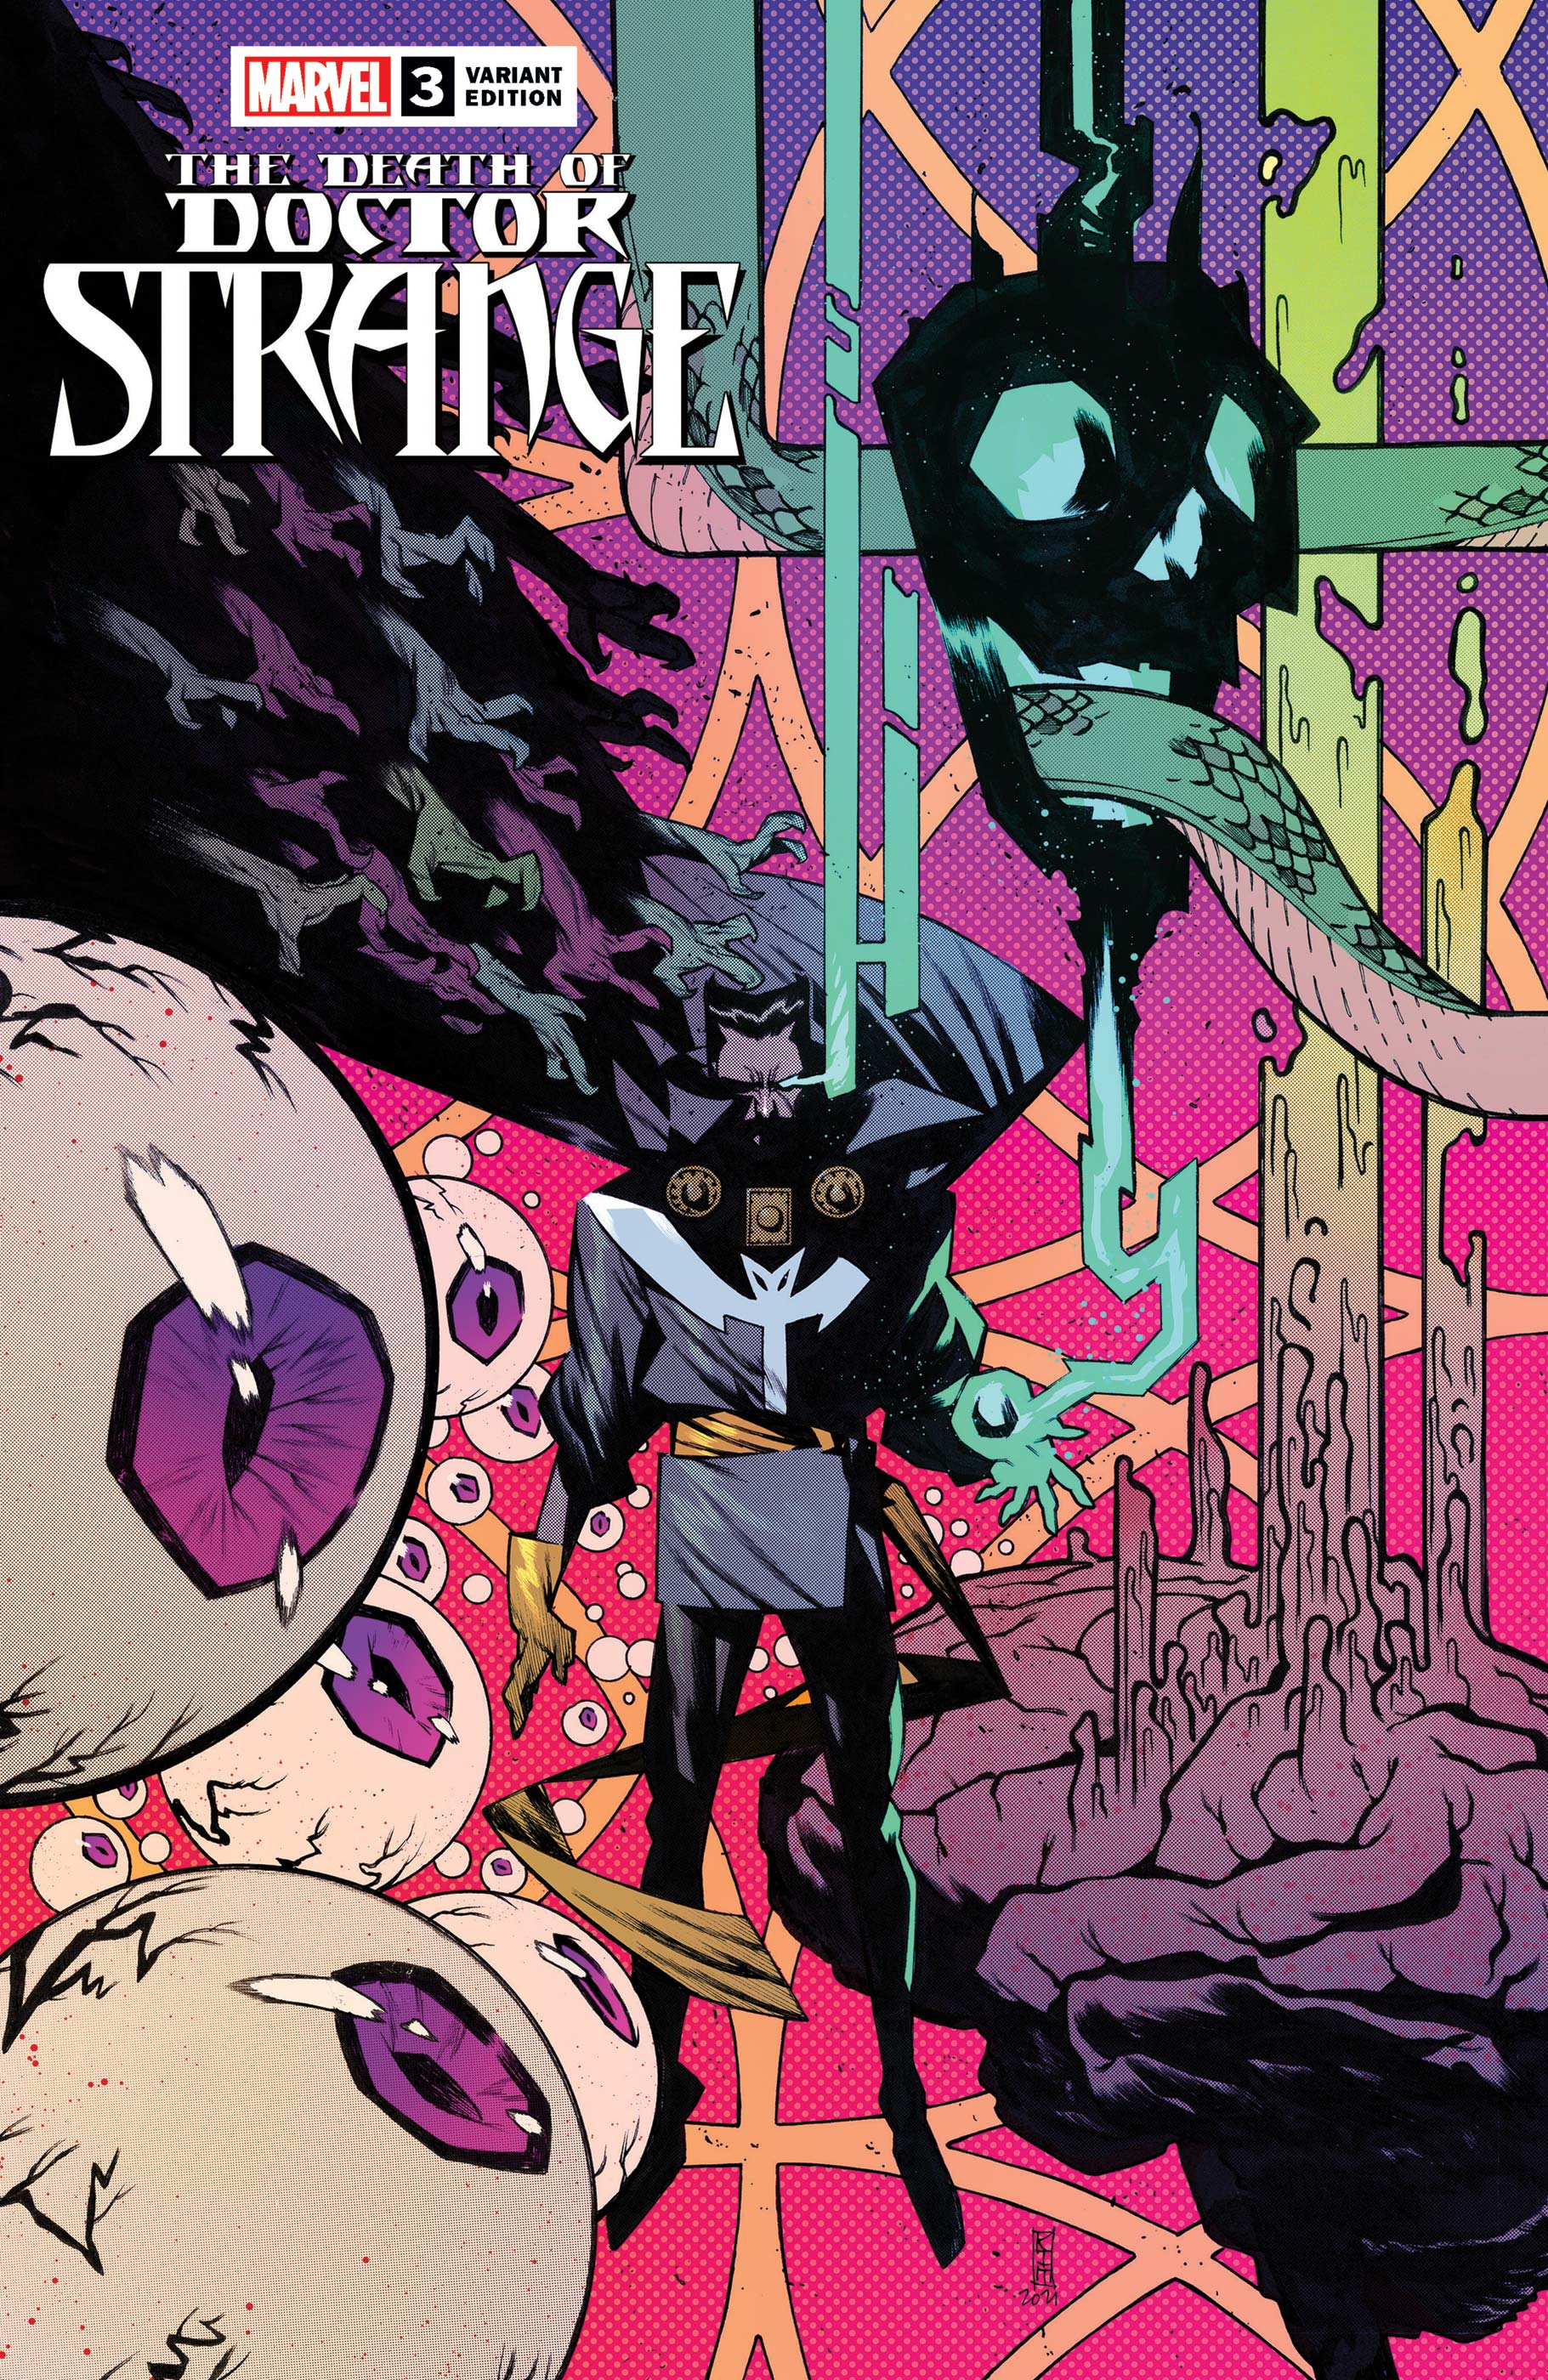 Meet The Mother Of All Mystical Threats In 'Death Of Doctor Strange #3'!